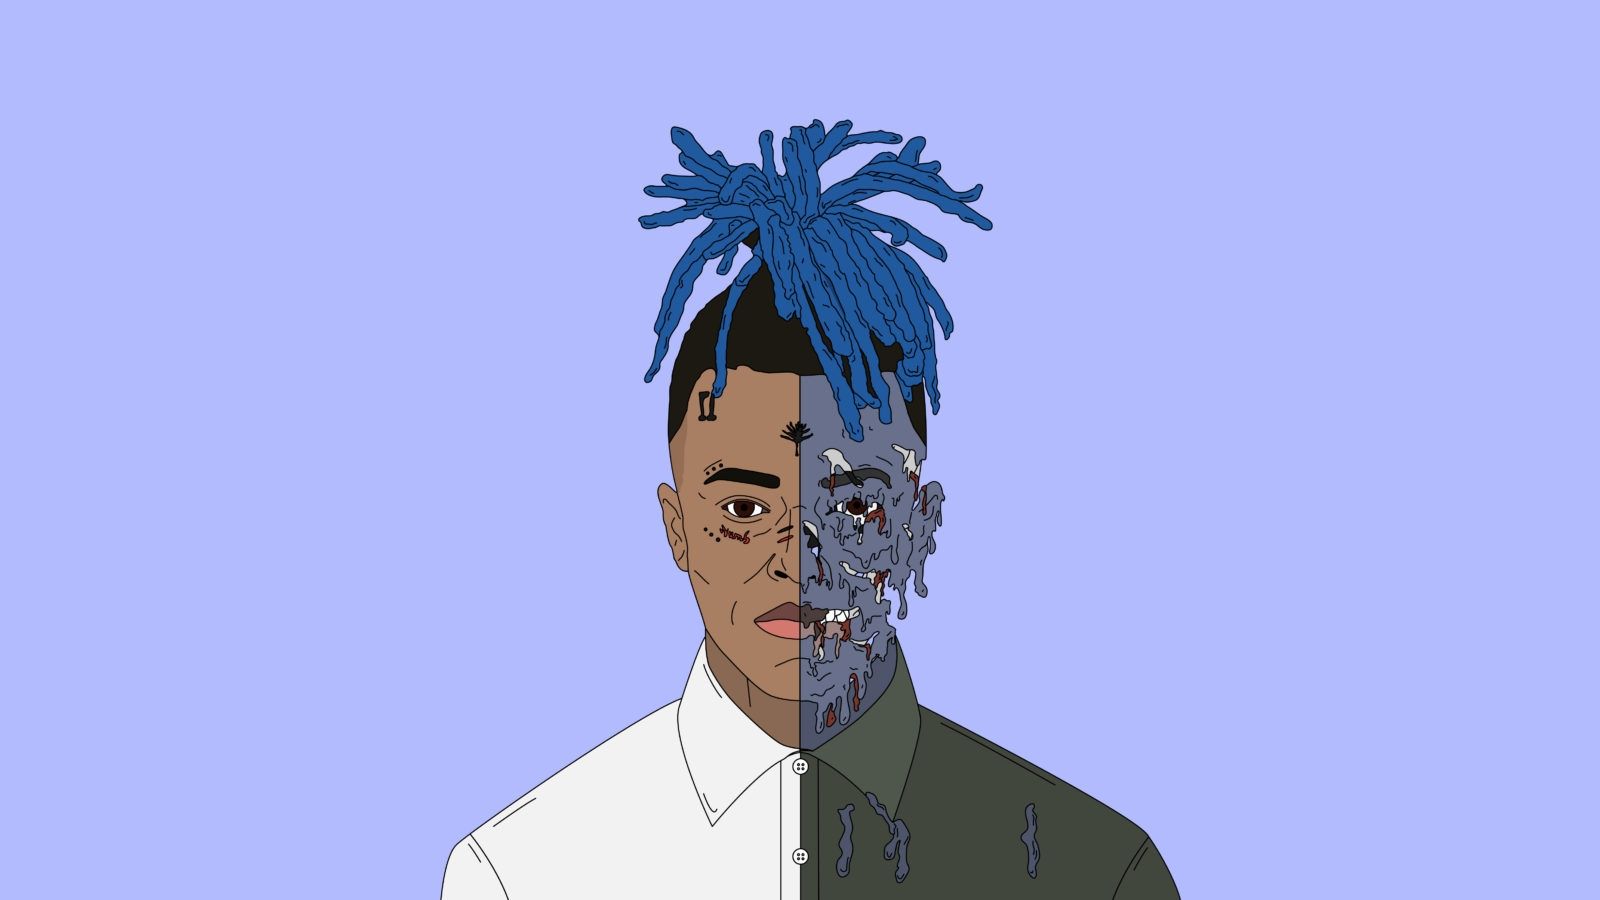 Free download XXXTentacion New Music Same Past Control FOREVER.